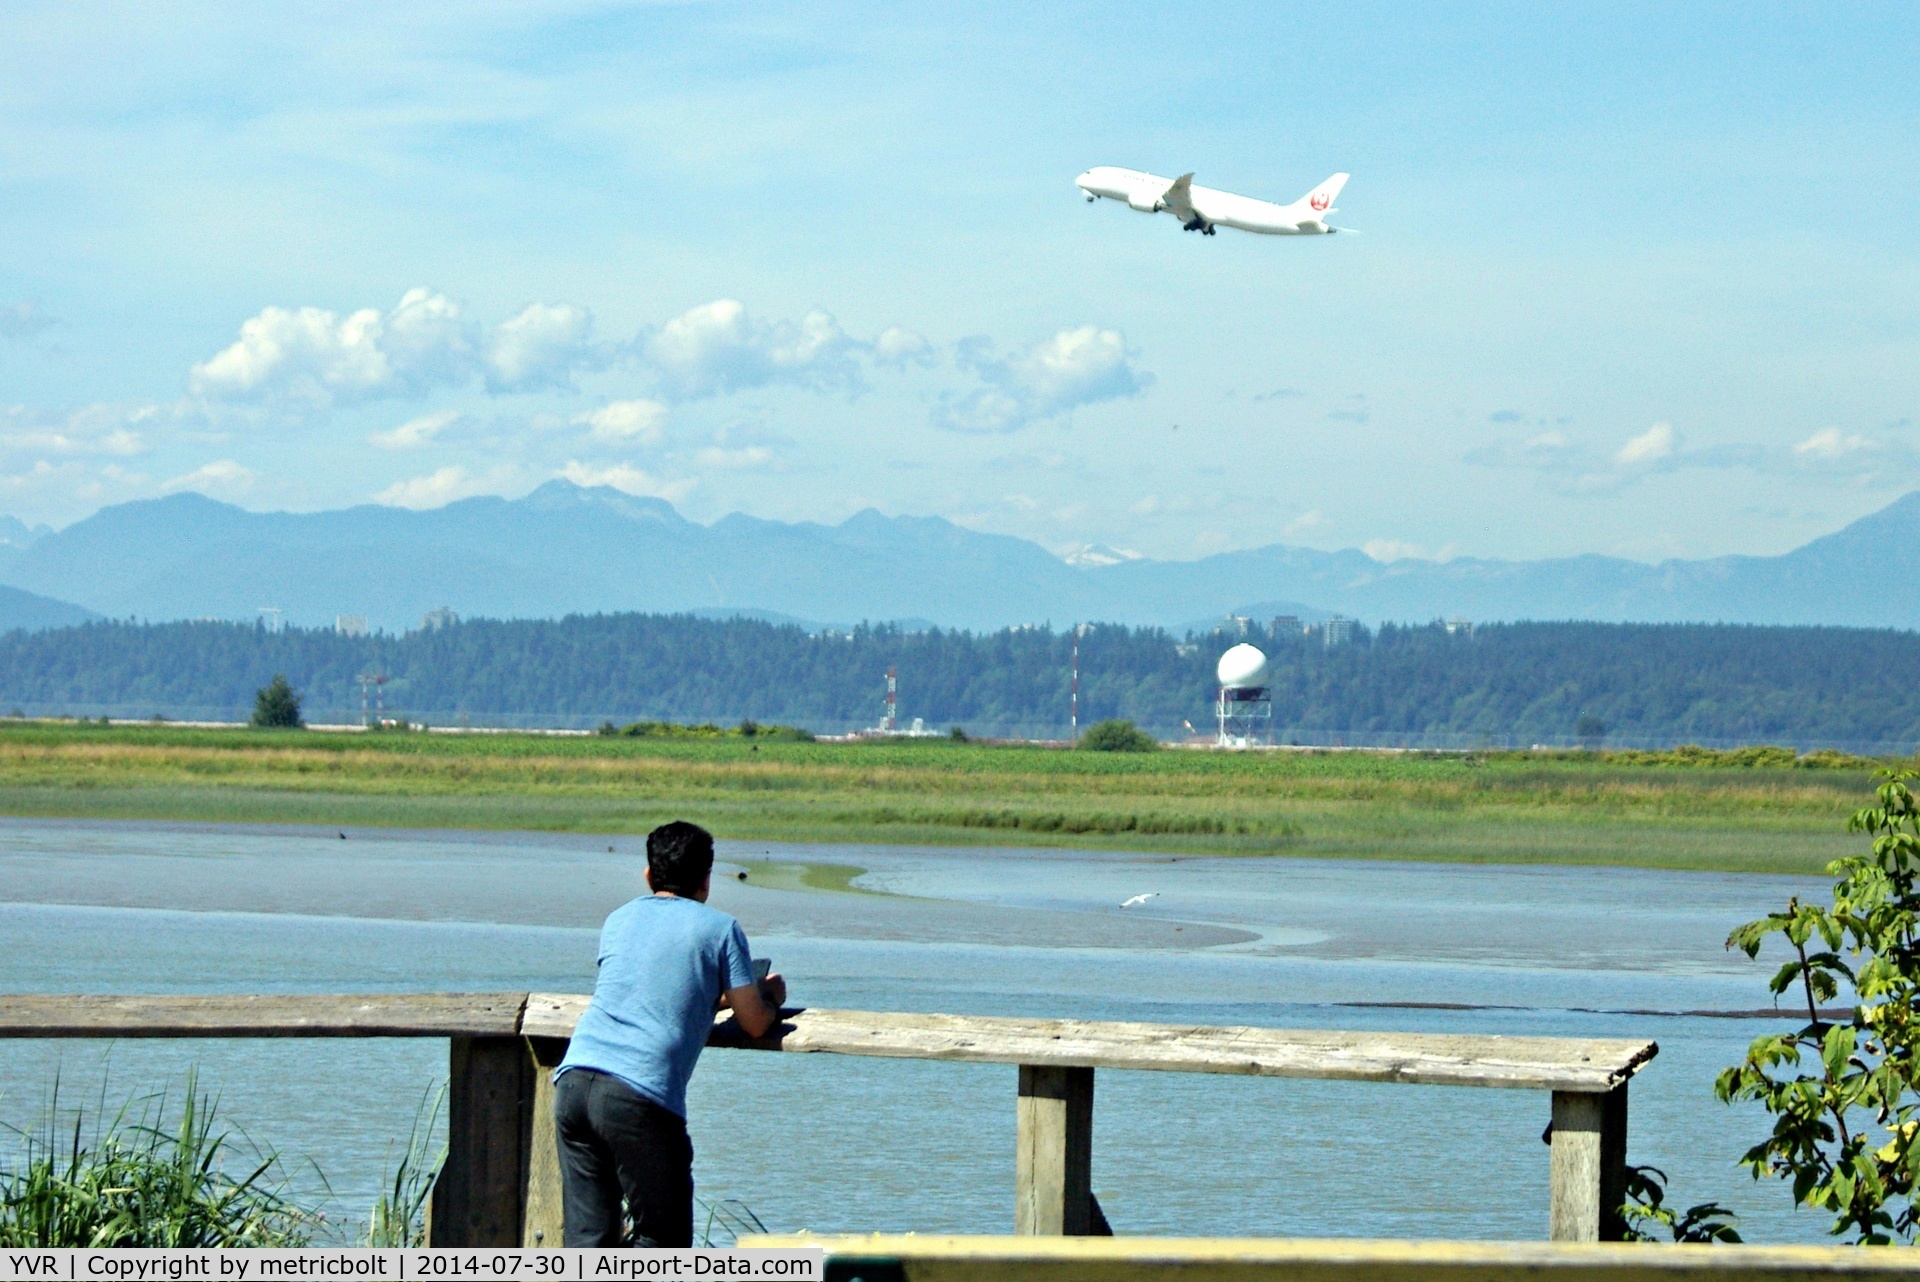 Vancouver International Airport, Vancouver, British Columbia Canada (YVR) - Watching JAL B787 departure to Narita